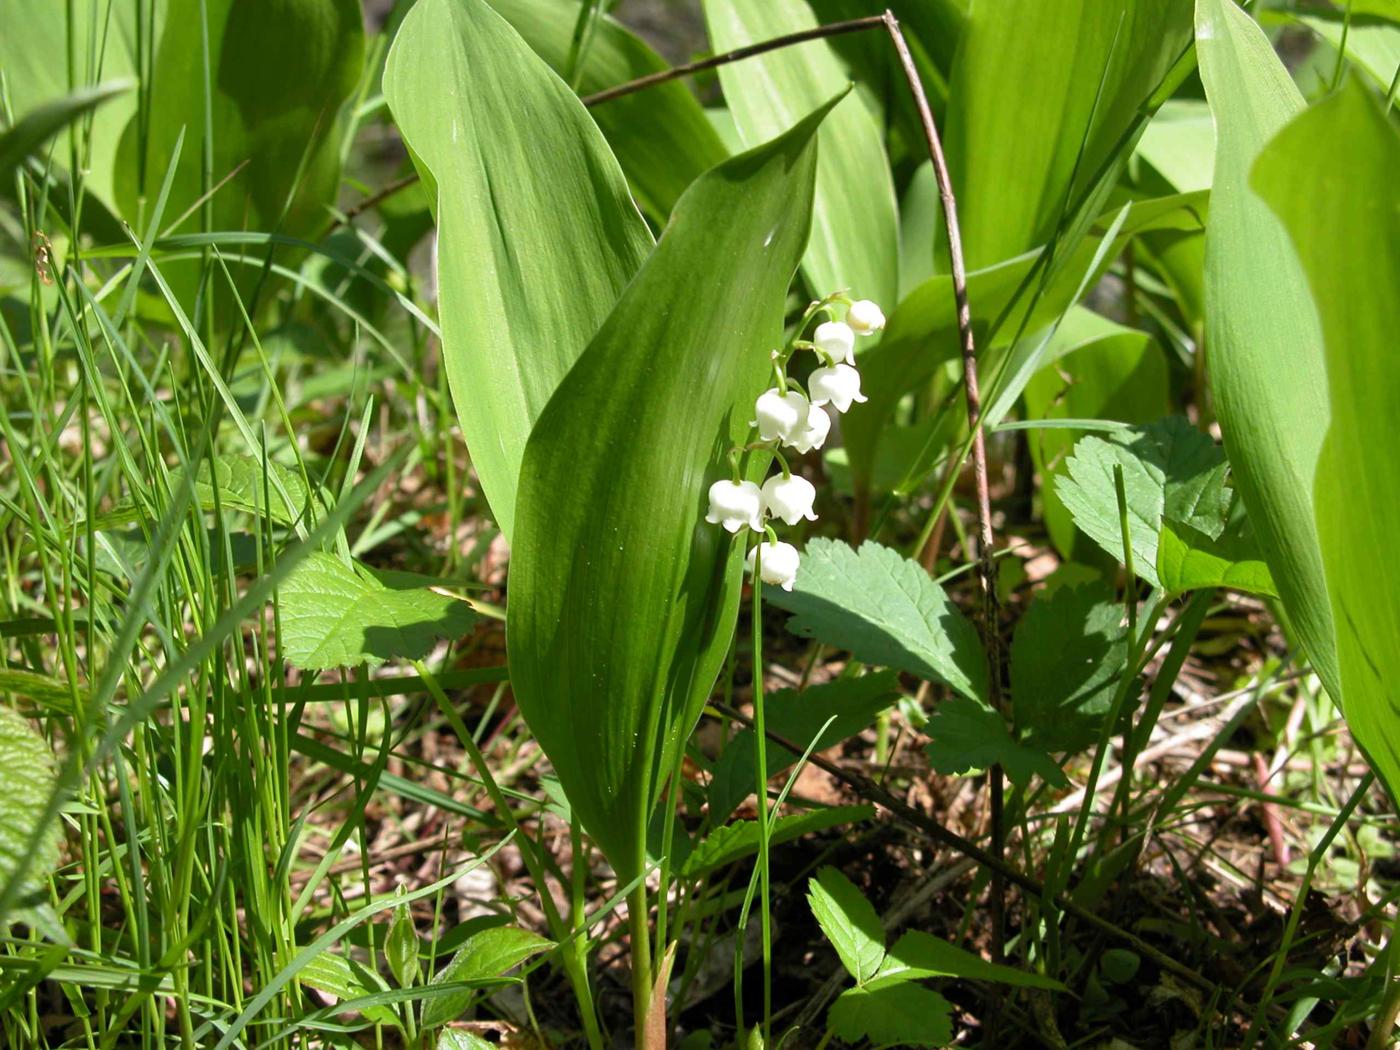 Lily-of-the-valley plant